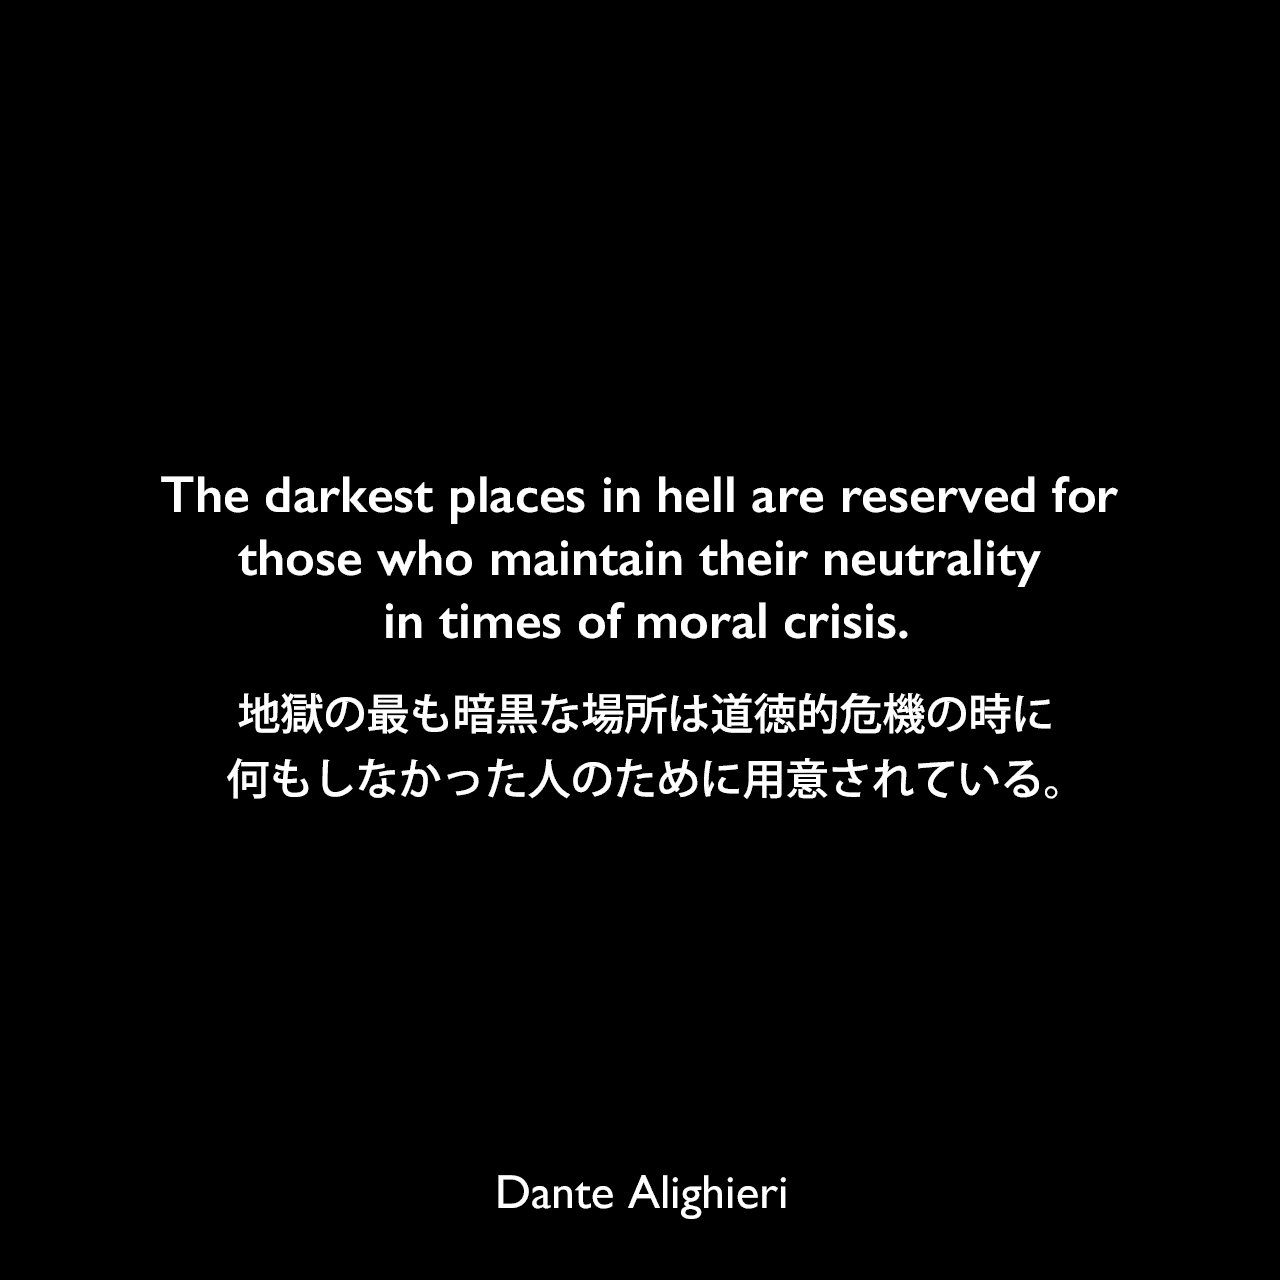 The darkest places in hell are reserved for those who maintain their neutrality in times of moral crisis.地獄の最も暗黒な場所は道徳的危機の時に、何もしなかった人のために用意されている。Dante Alighieri